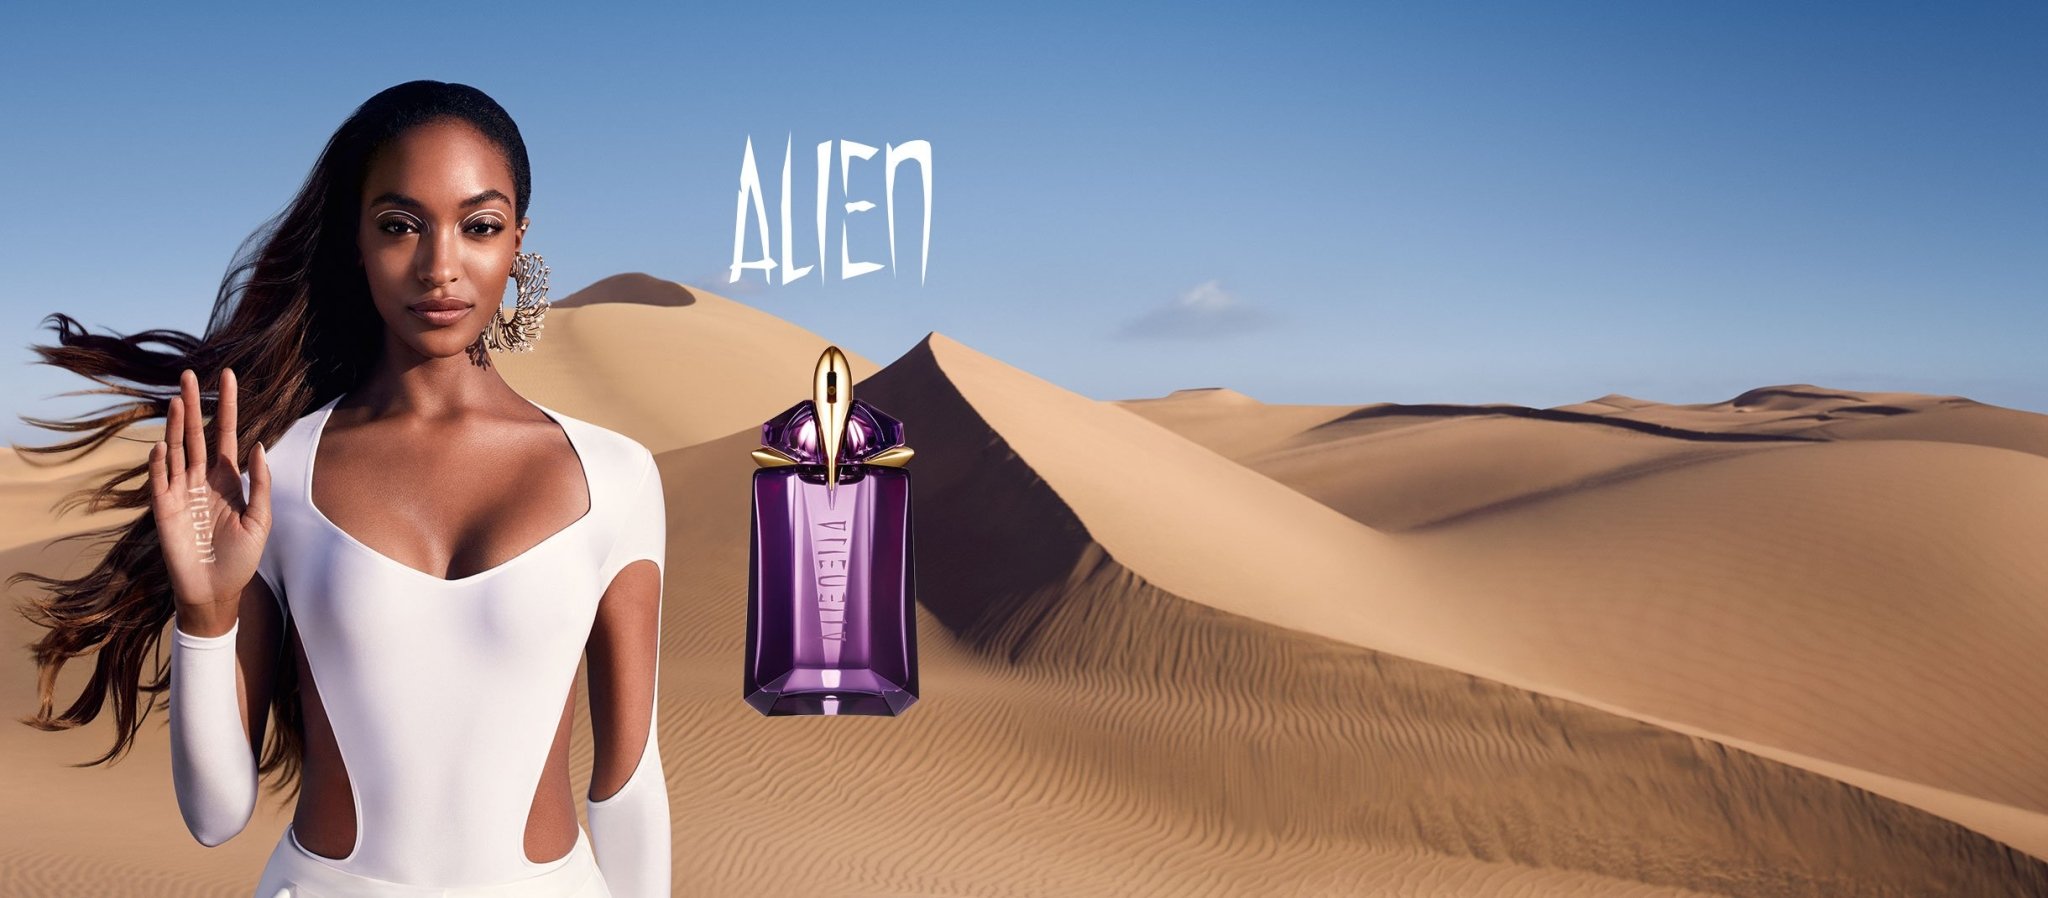 Thierry Mugler Alien Review: The Perfect Perfume? [2022] - My Perfume Shop